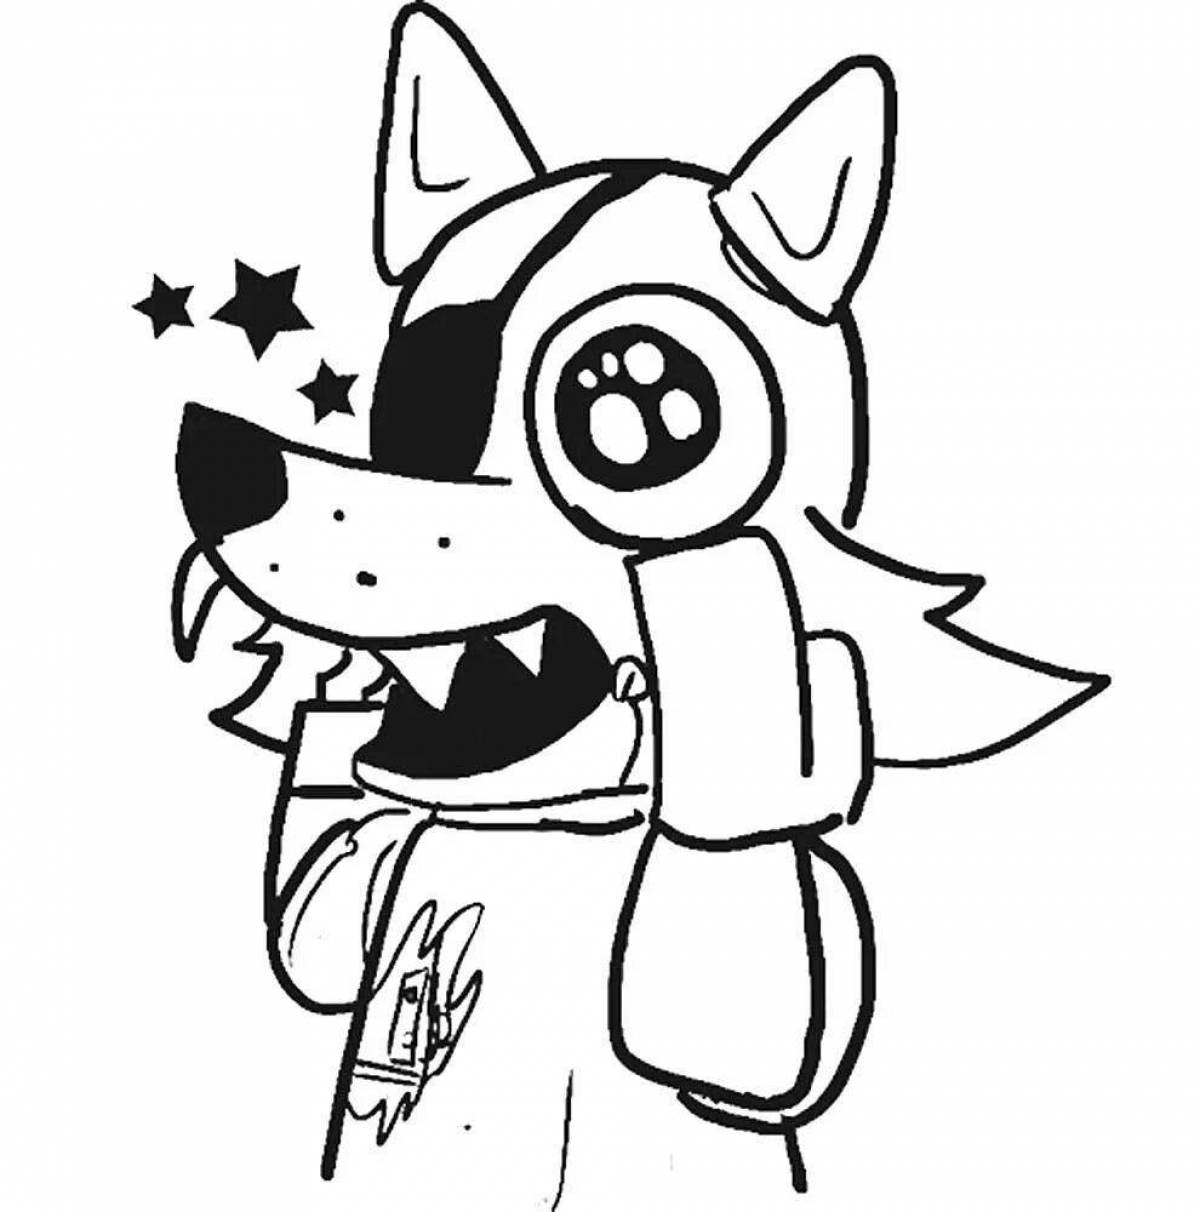 Cute foxy boo coloring page